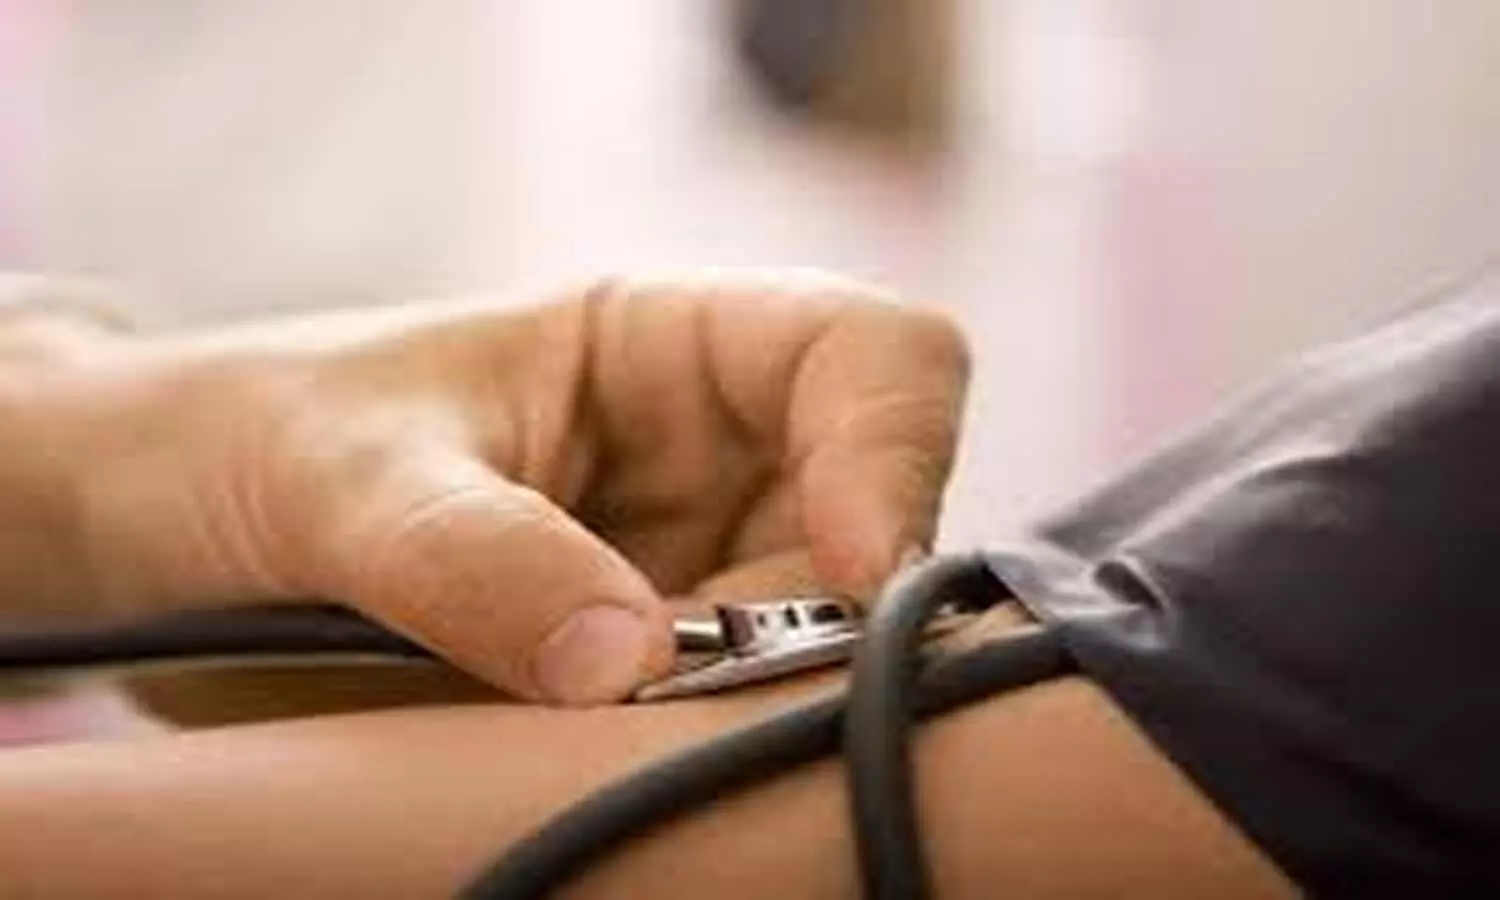 Both low and high testosterone levels in hypertension linked to higher CV risk: Study